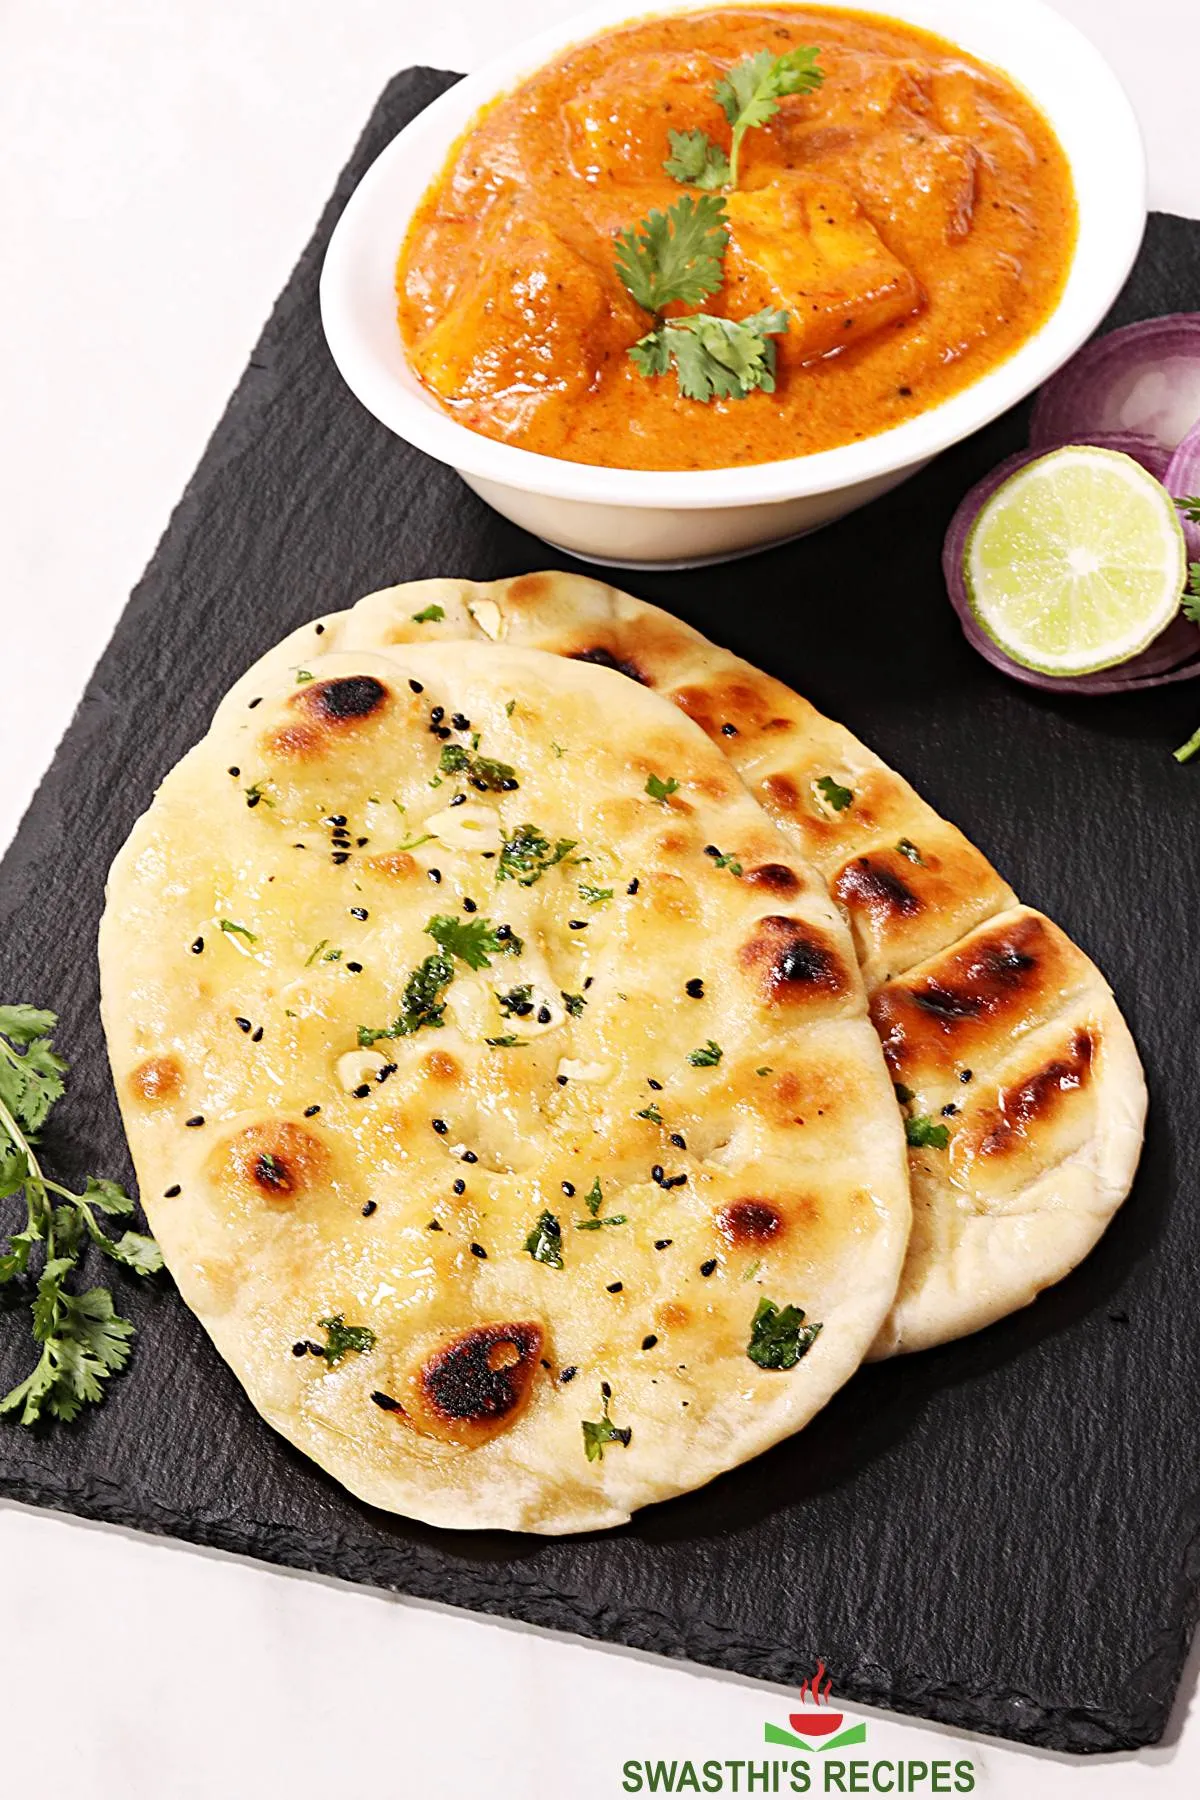 Butter naan served with curry